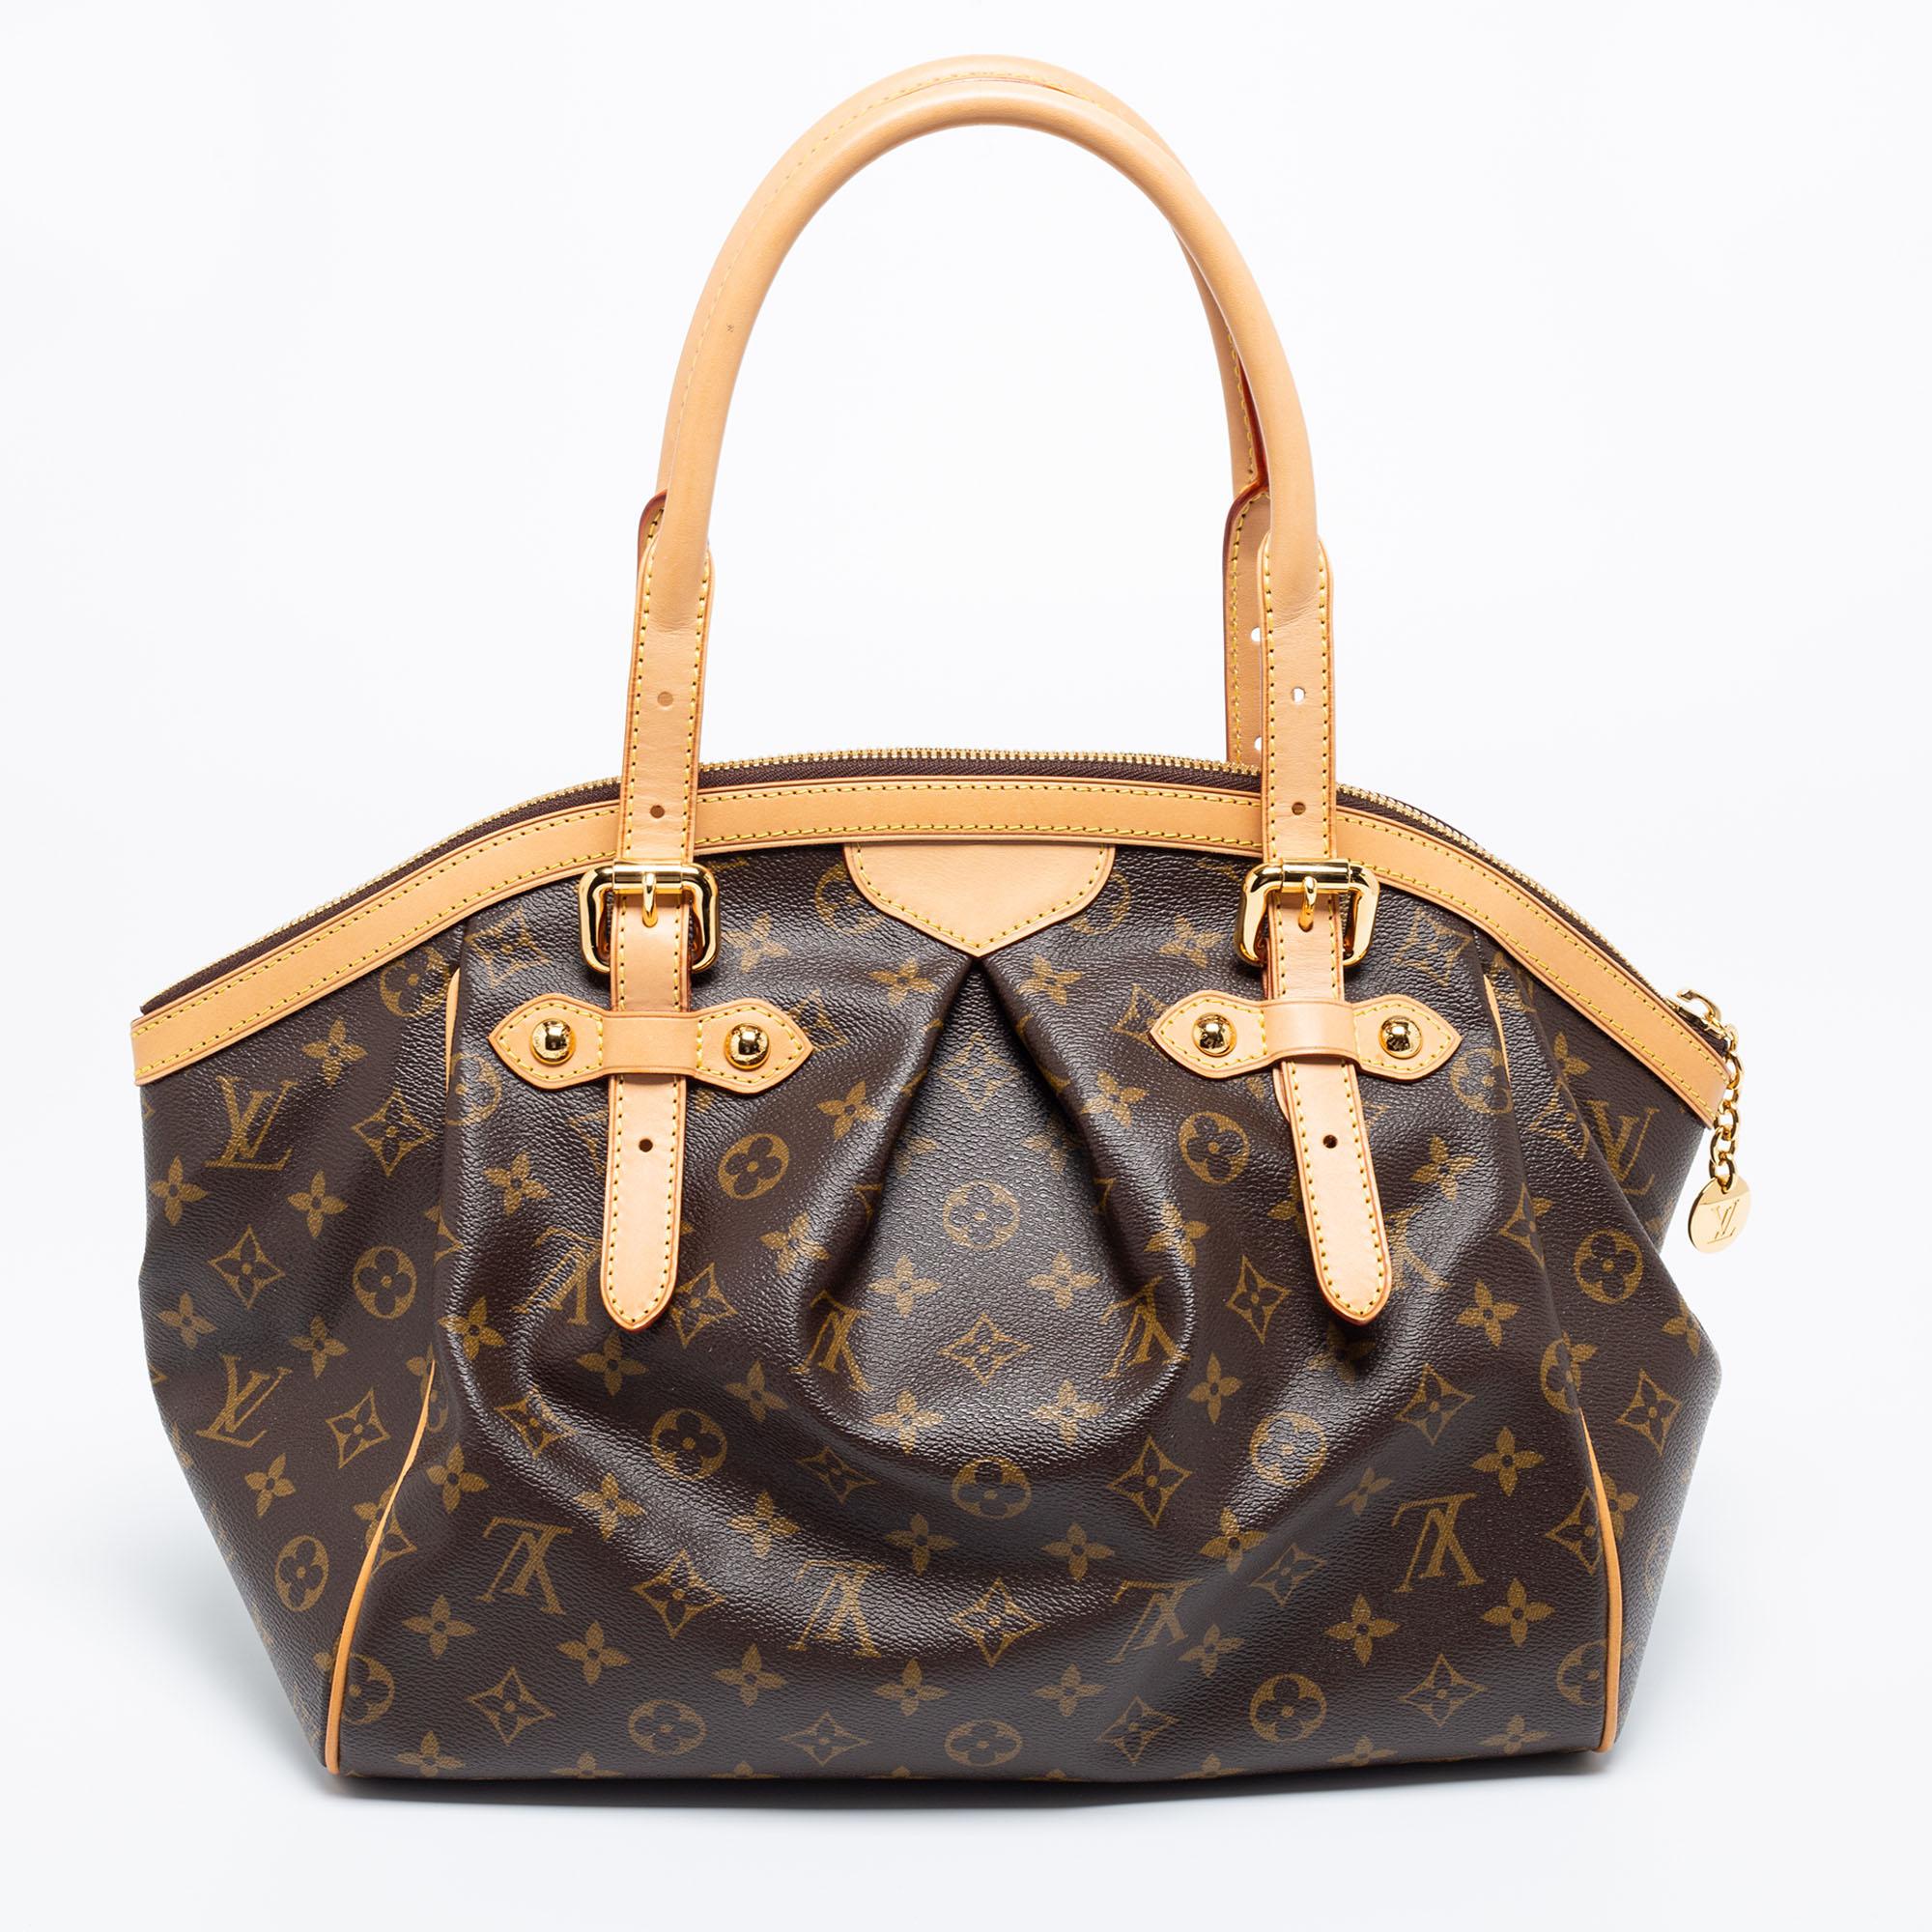 The gorgeous LV Tivoli bag is an enduring style companion. Crafted from monogram canvas, the bag has leather trims, two leather handles, and protective metal feet. It has a top zipper that opens to reveal a spacious canvas interior meant to easily